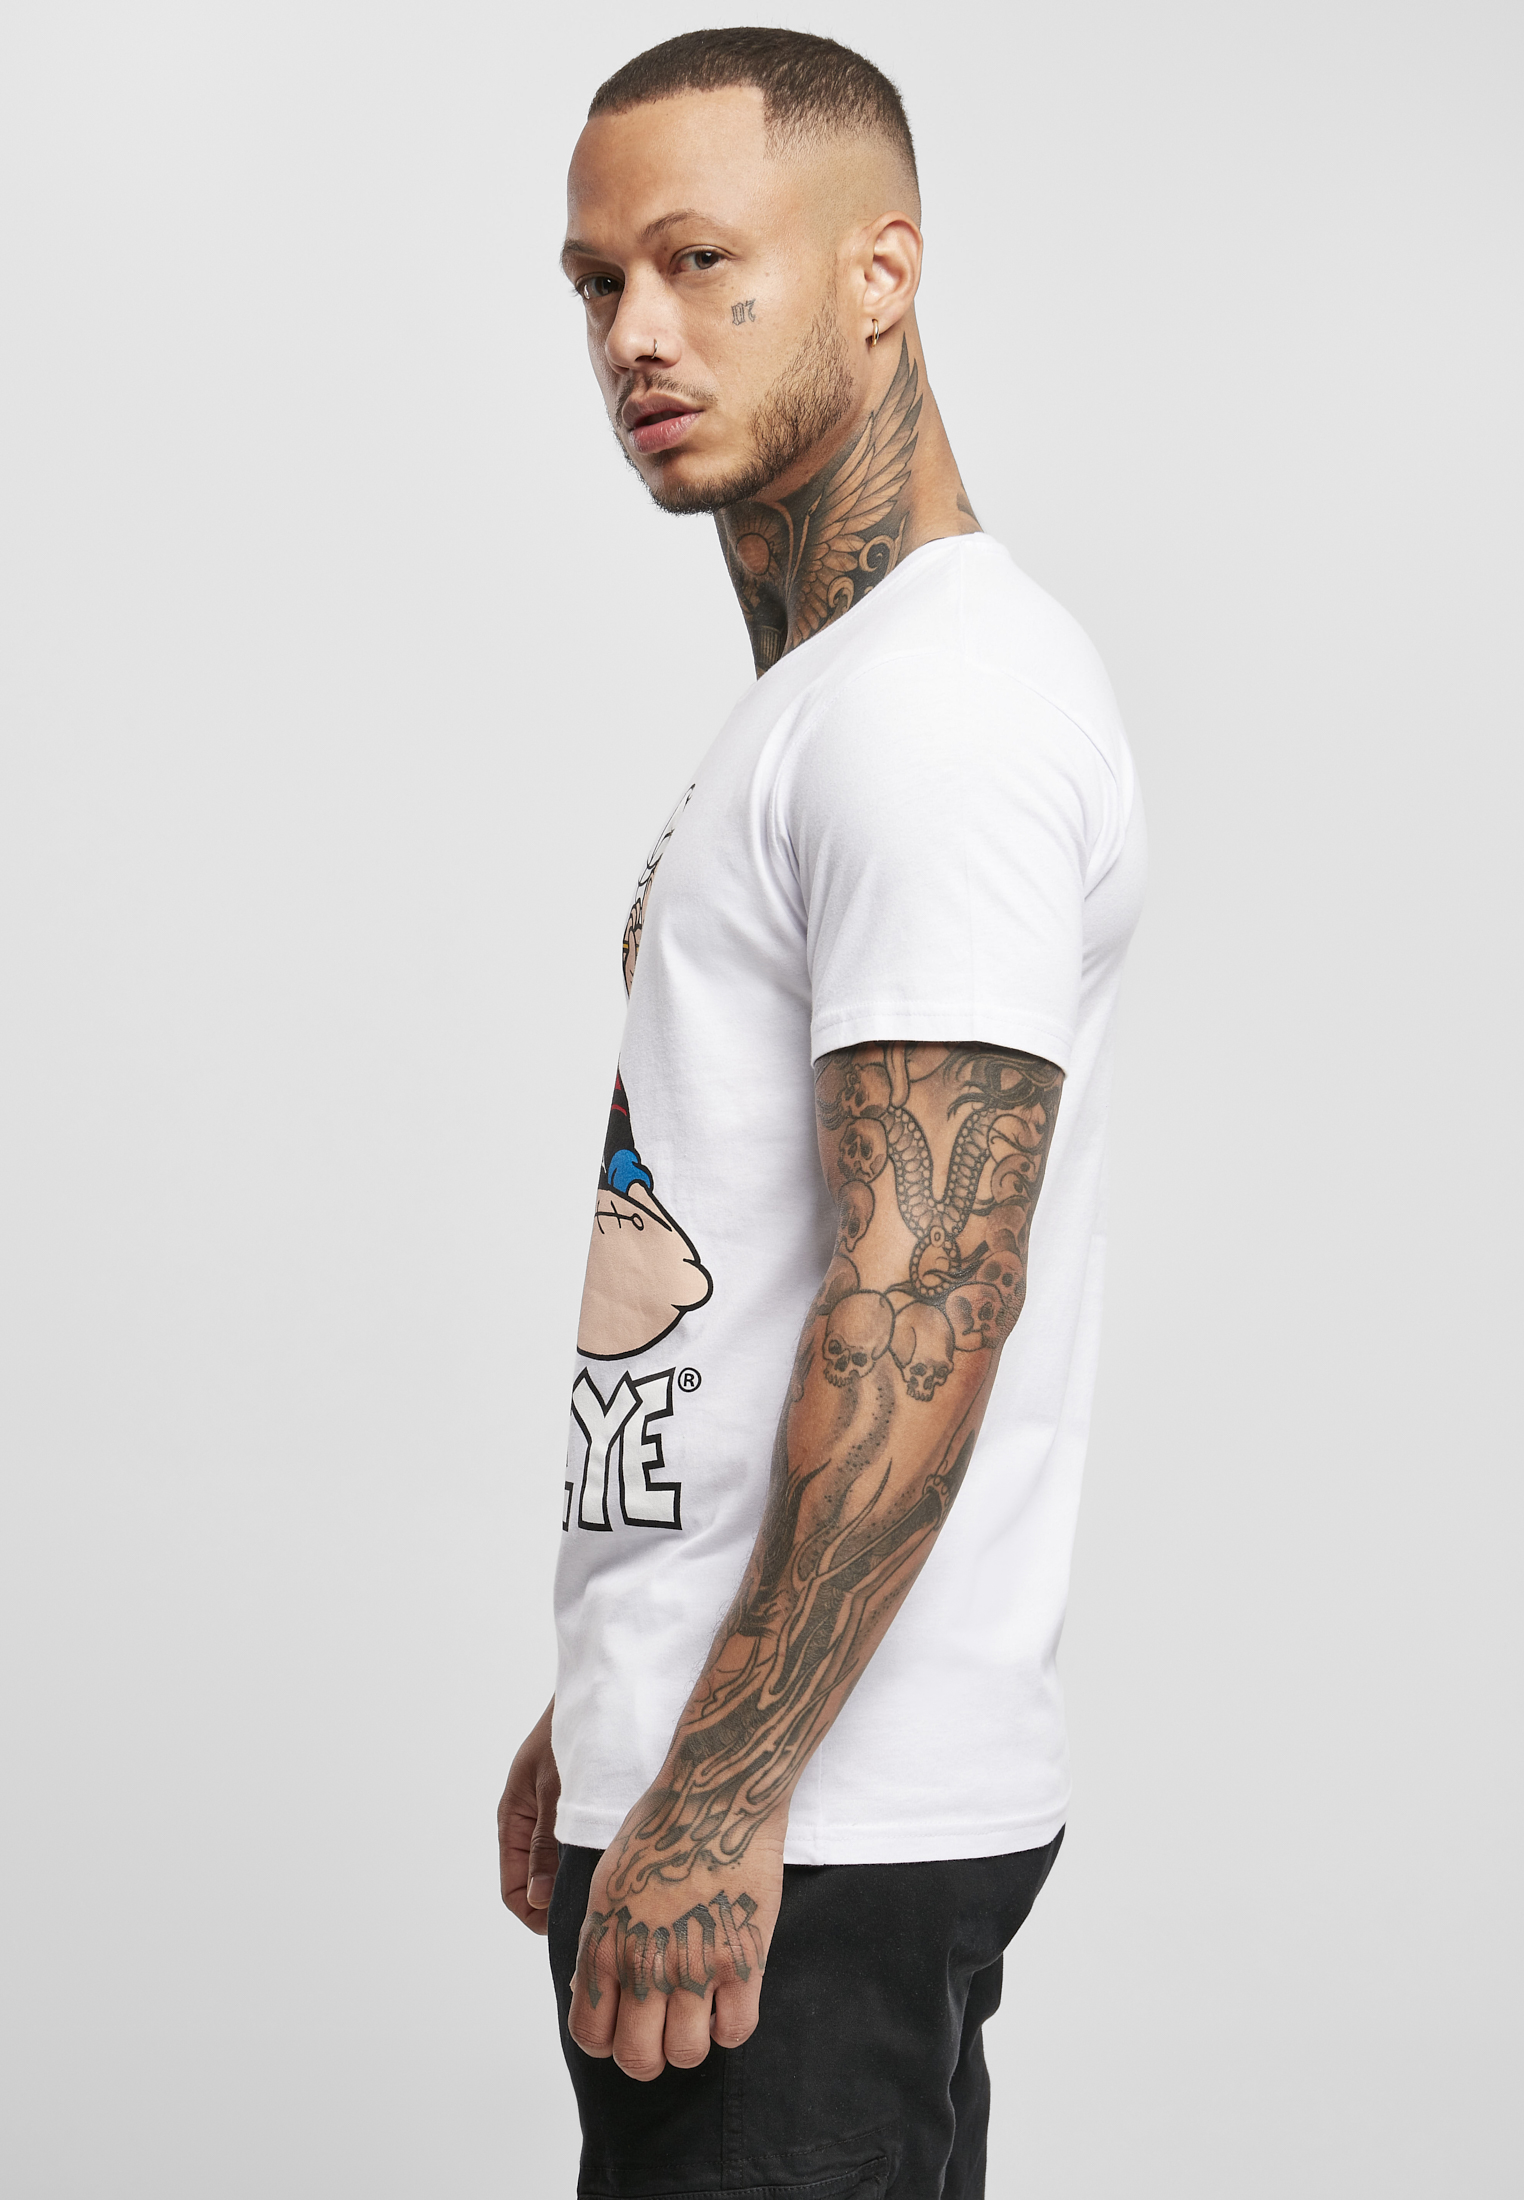 T-Shirts Popeye Logo And Pose Tee in Farbe white